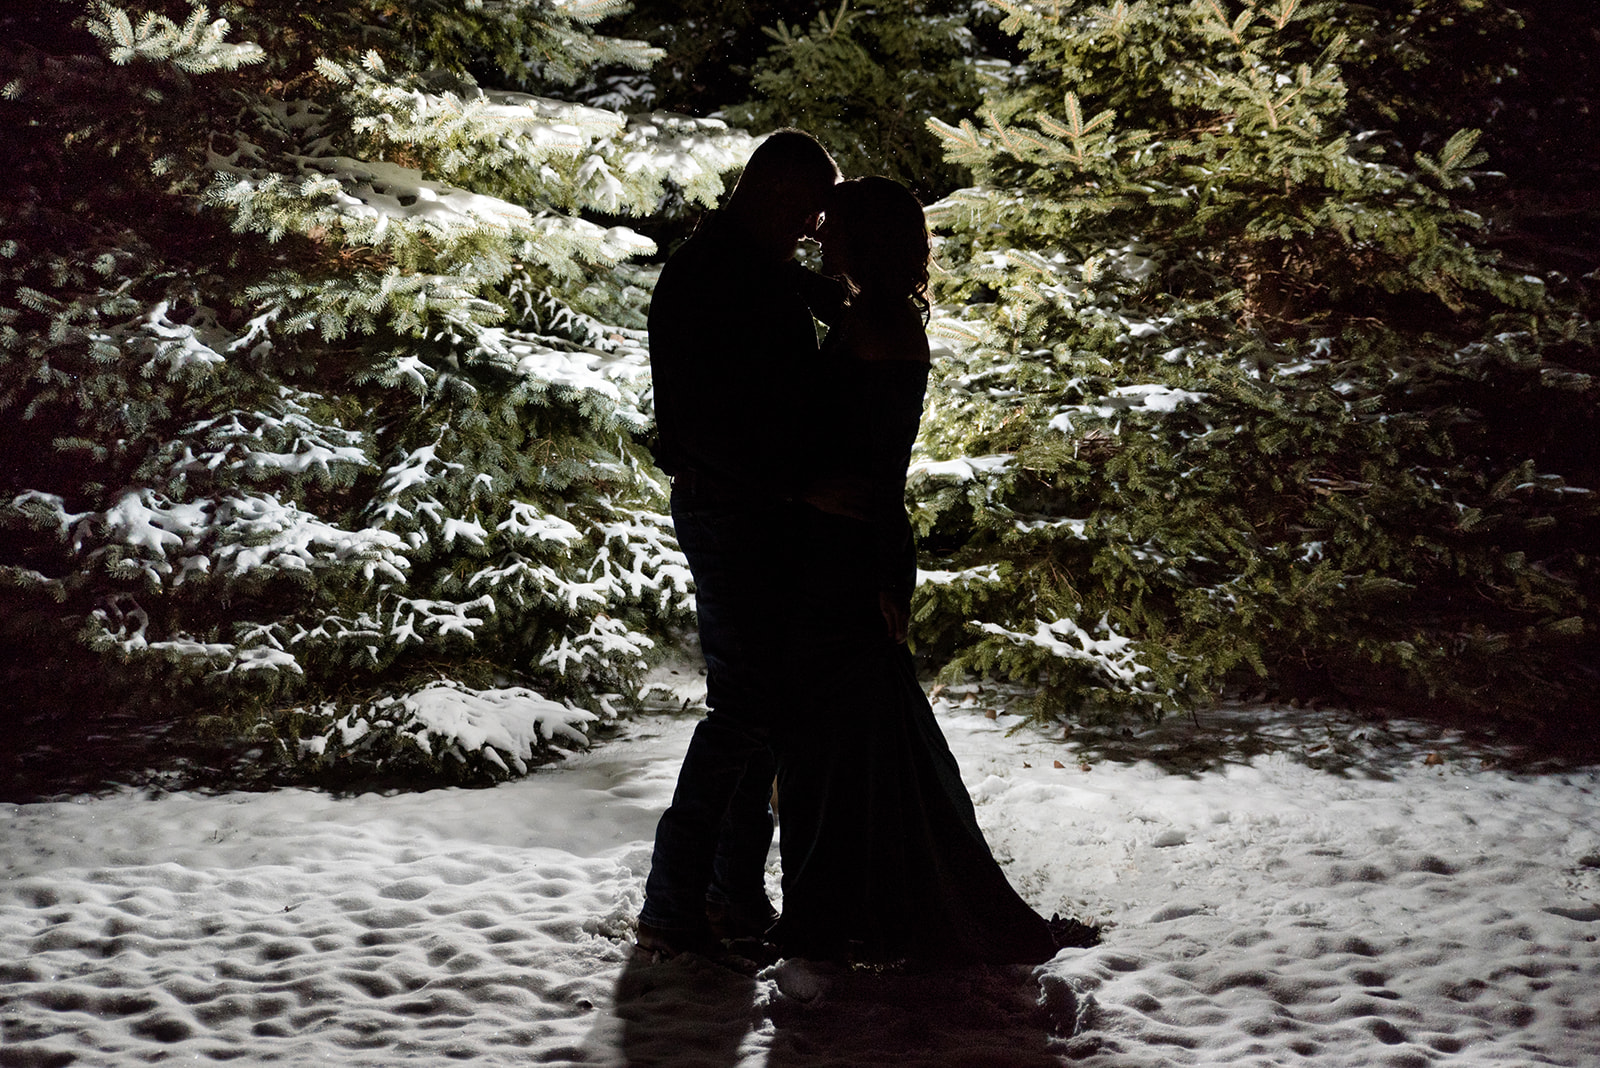 snowy night silhouette of married couple